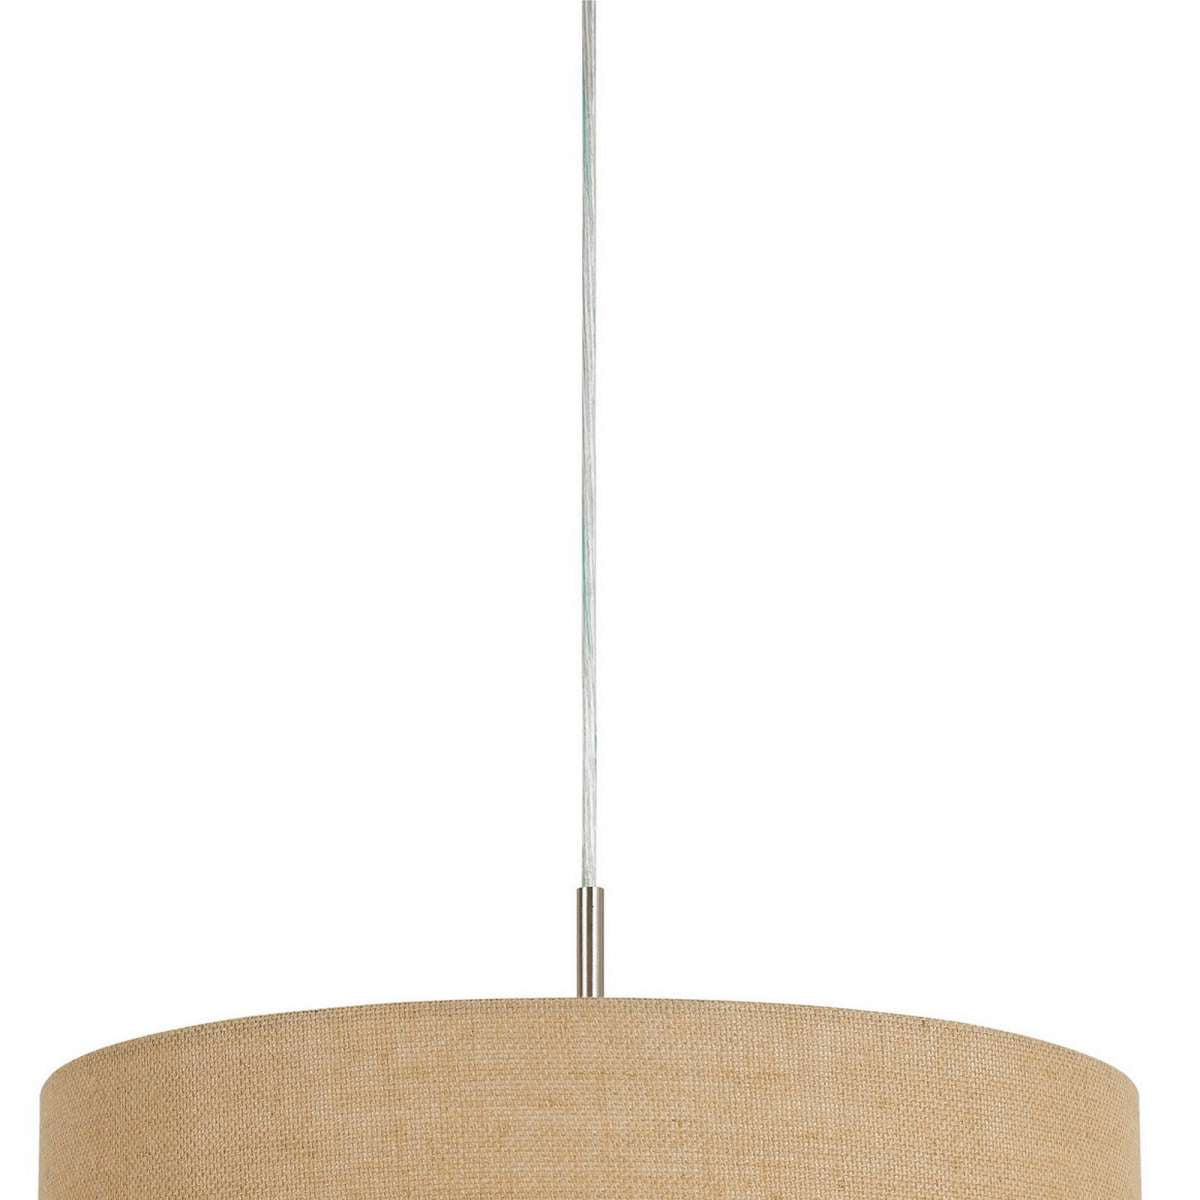 Metal Pendant Lighting With Fabric Circular Drum Shade And Cord, Beige By Benzara